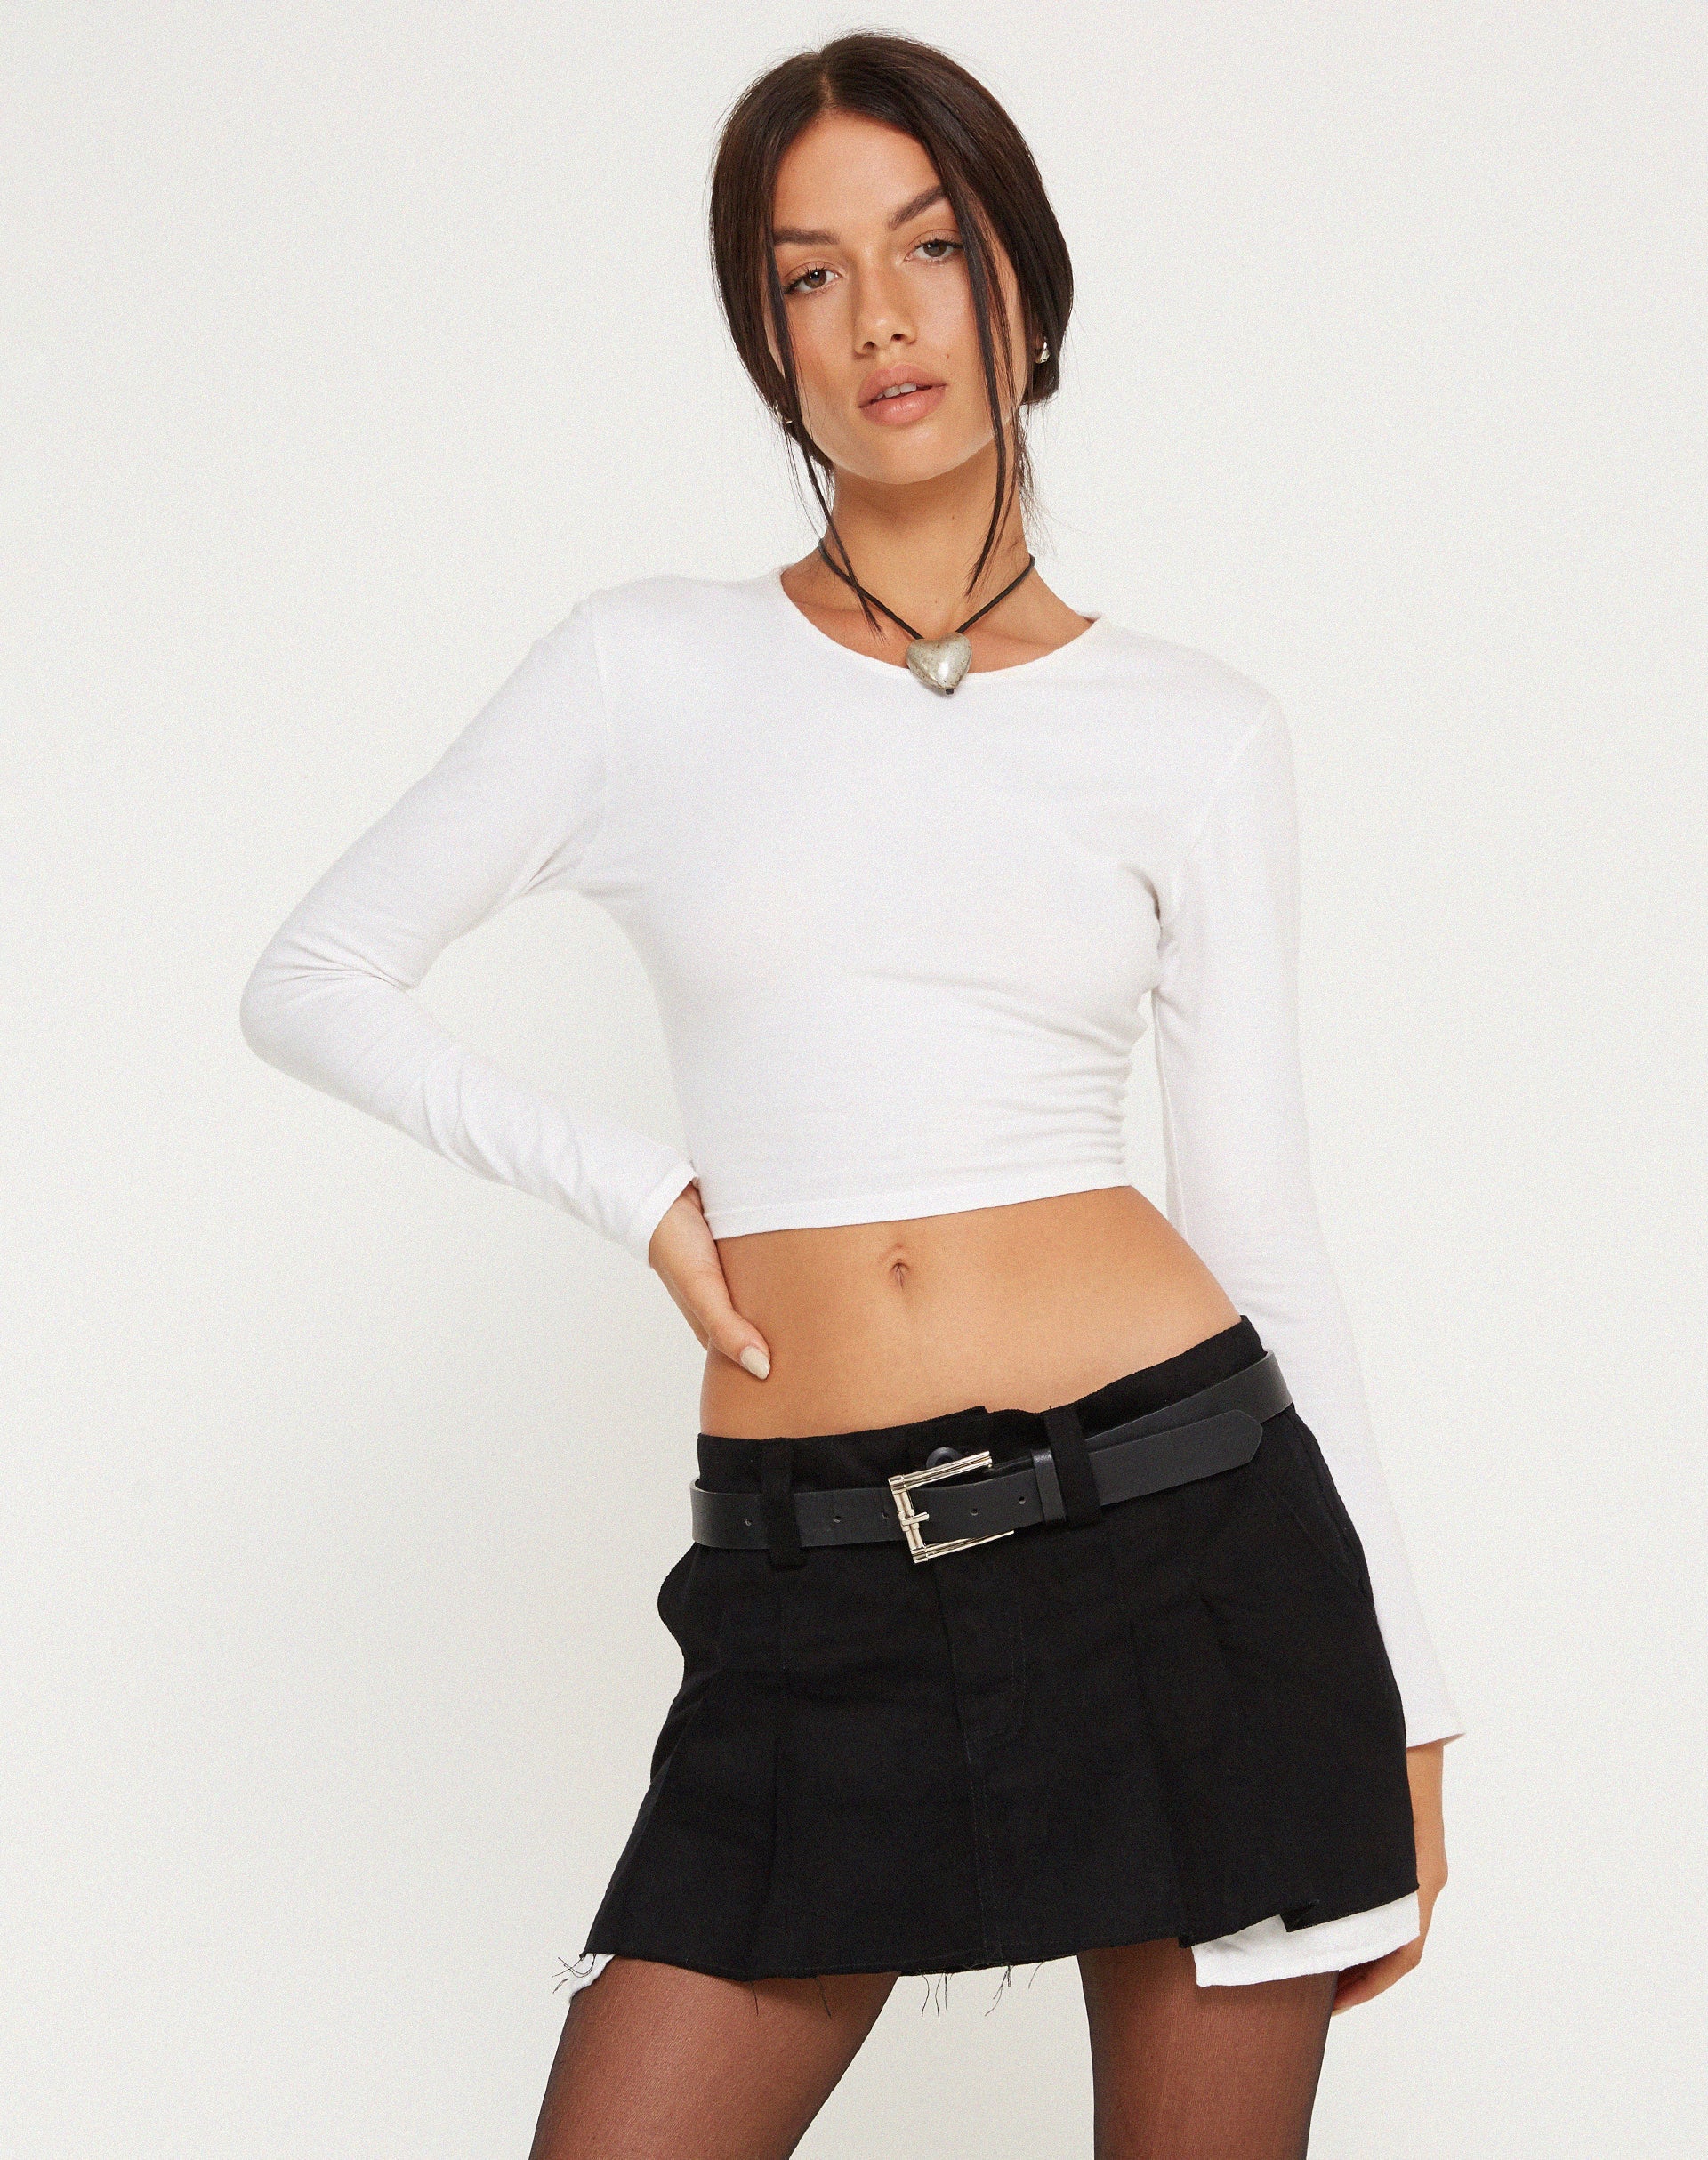 image of Blythe Low Waisted Mini Skirt in Twill Suede Black